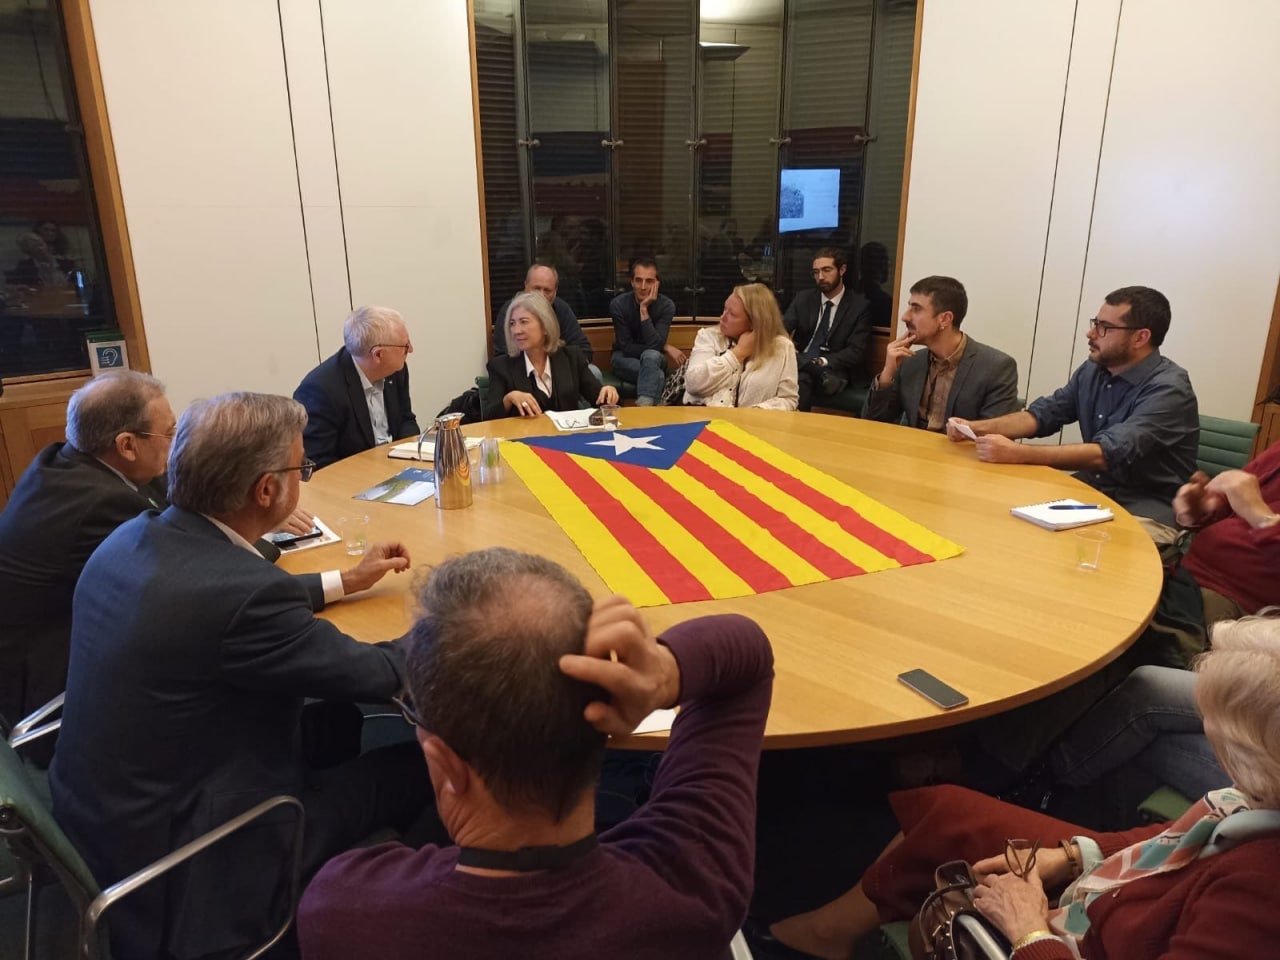 Westminster MPs hear Catalan activist Dolors Feliu: "Spain's repression carries on"